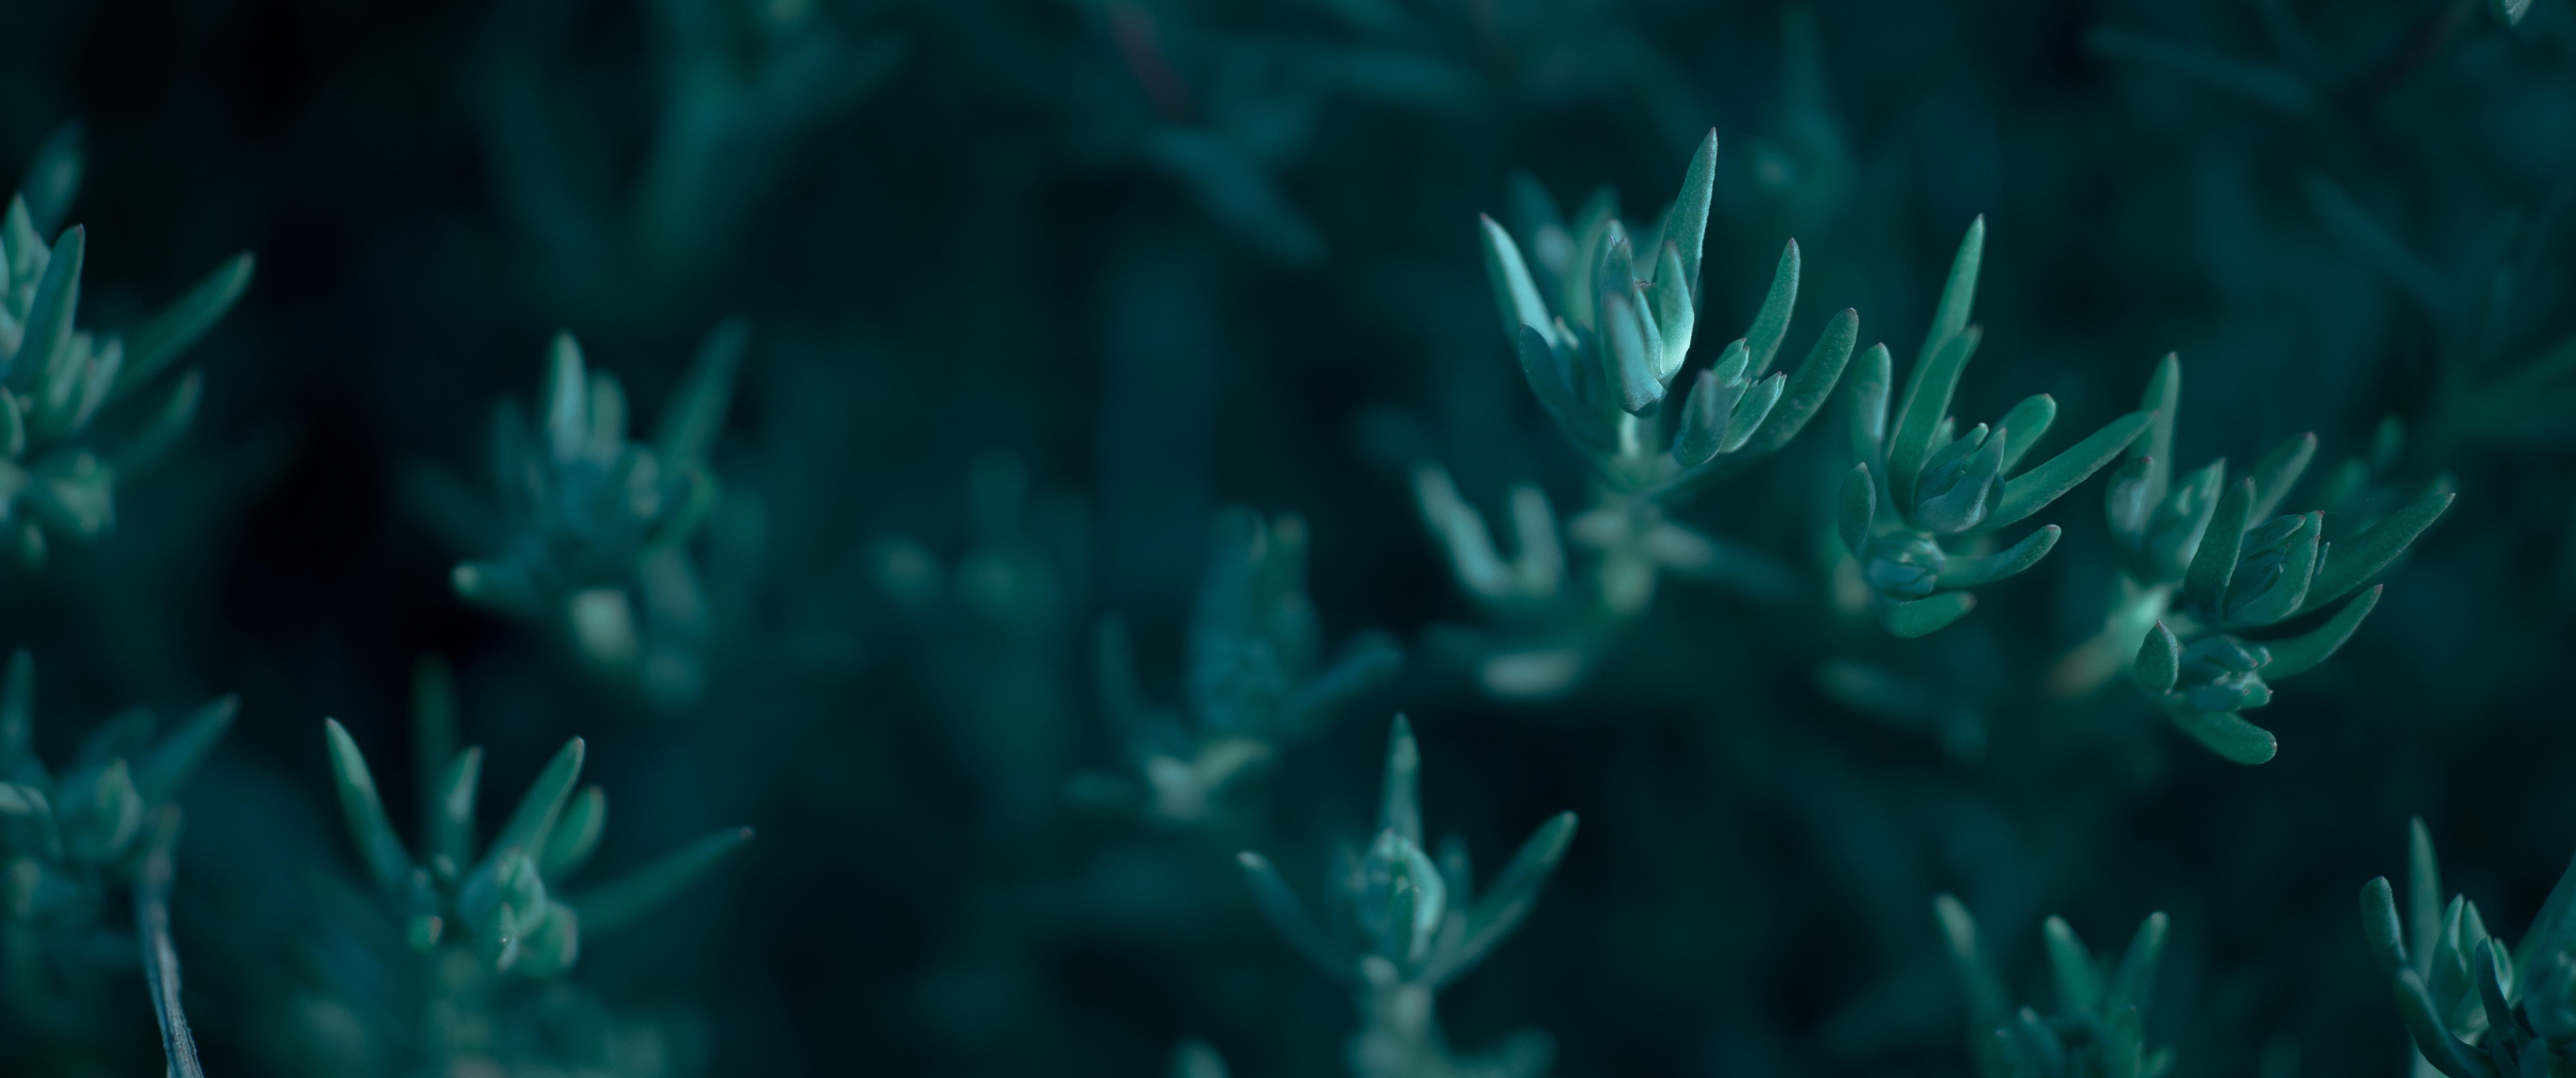 General 3440x1440 photography ultrawide plants succulent